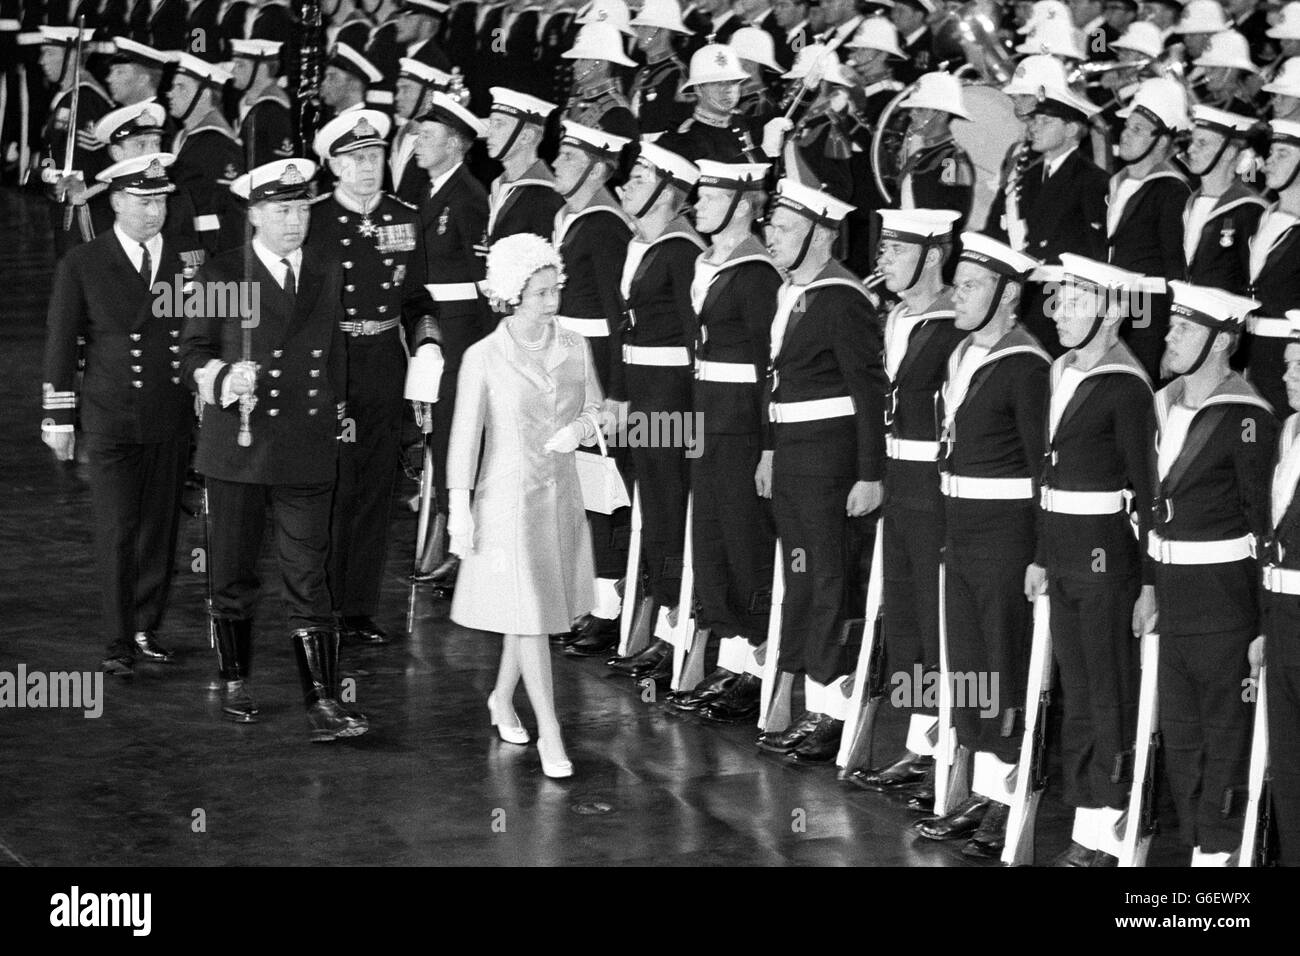 The Queen inspecting the Colour Guard in the hanger aboard aircraft carrier HMS Eagle in Torbay, Devon. She presented a new colour to the western Fleet. The ceremony was held in the hanger because of high wind. Stock Photo